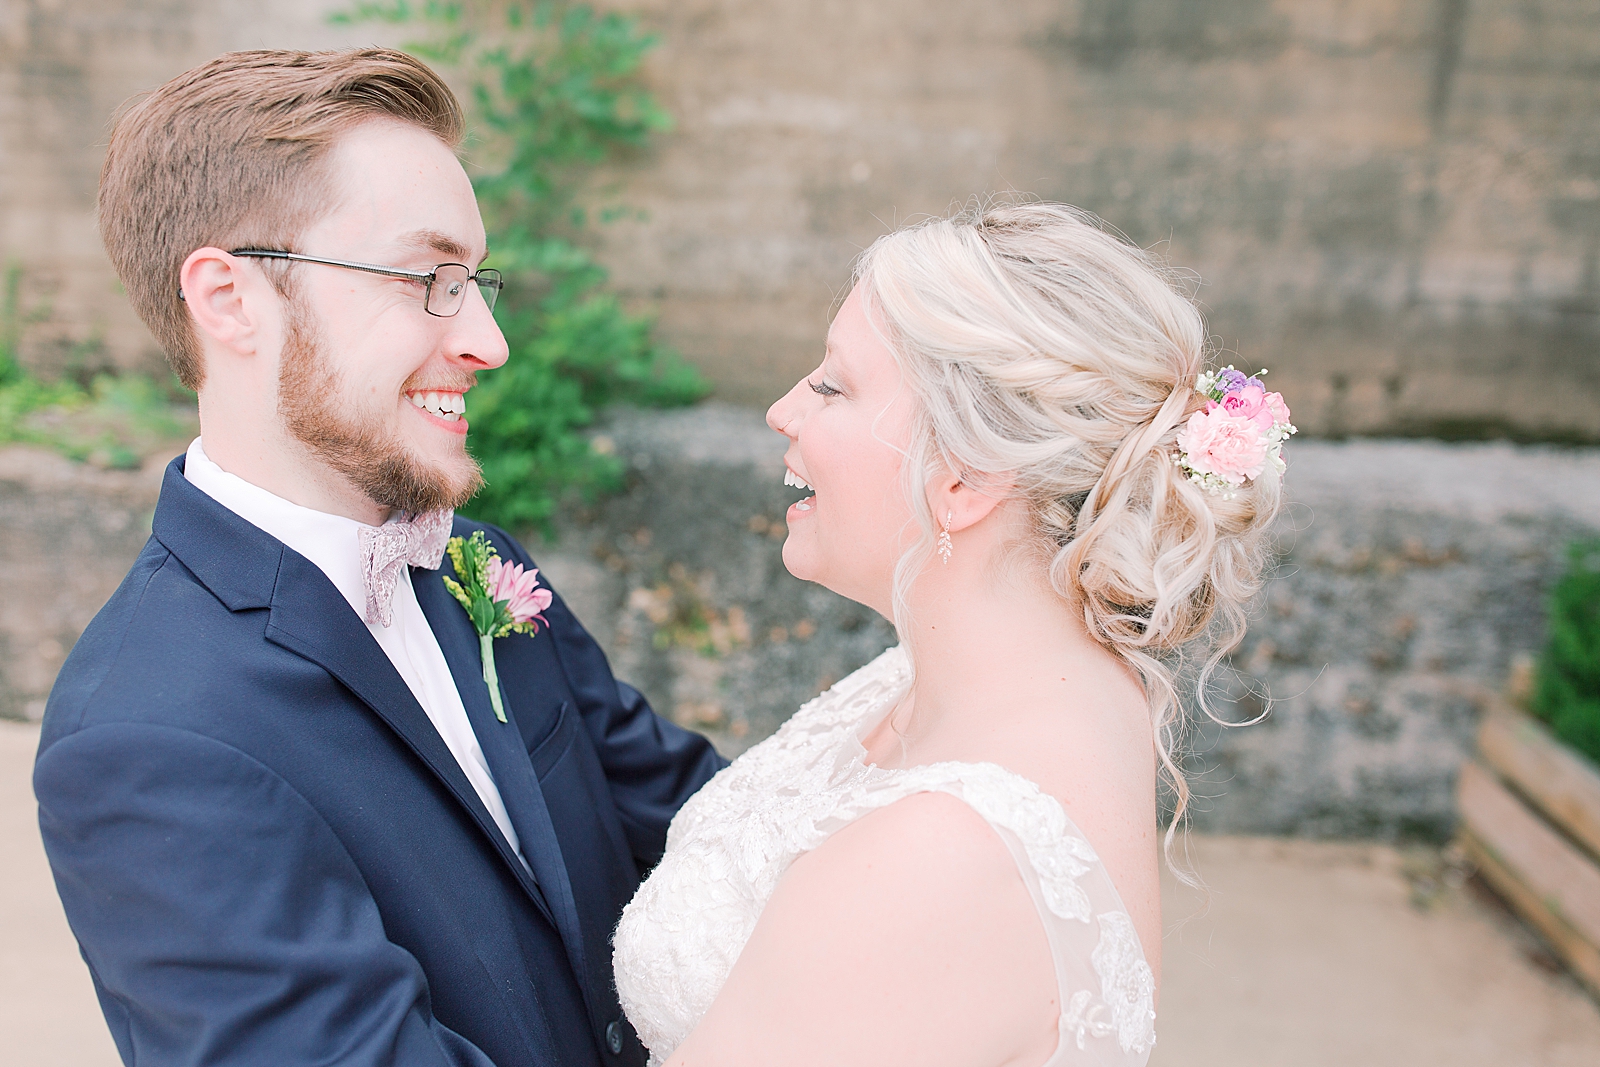 Black Fox Farms Garden Wedding Bride and Groom Laughing at Each Other Photo